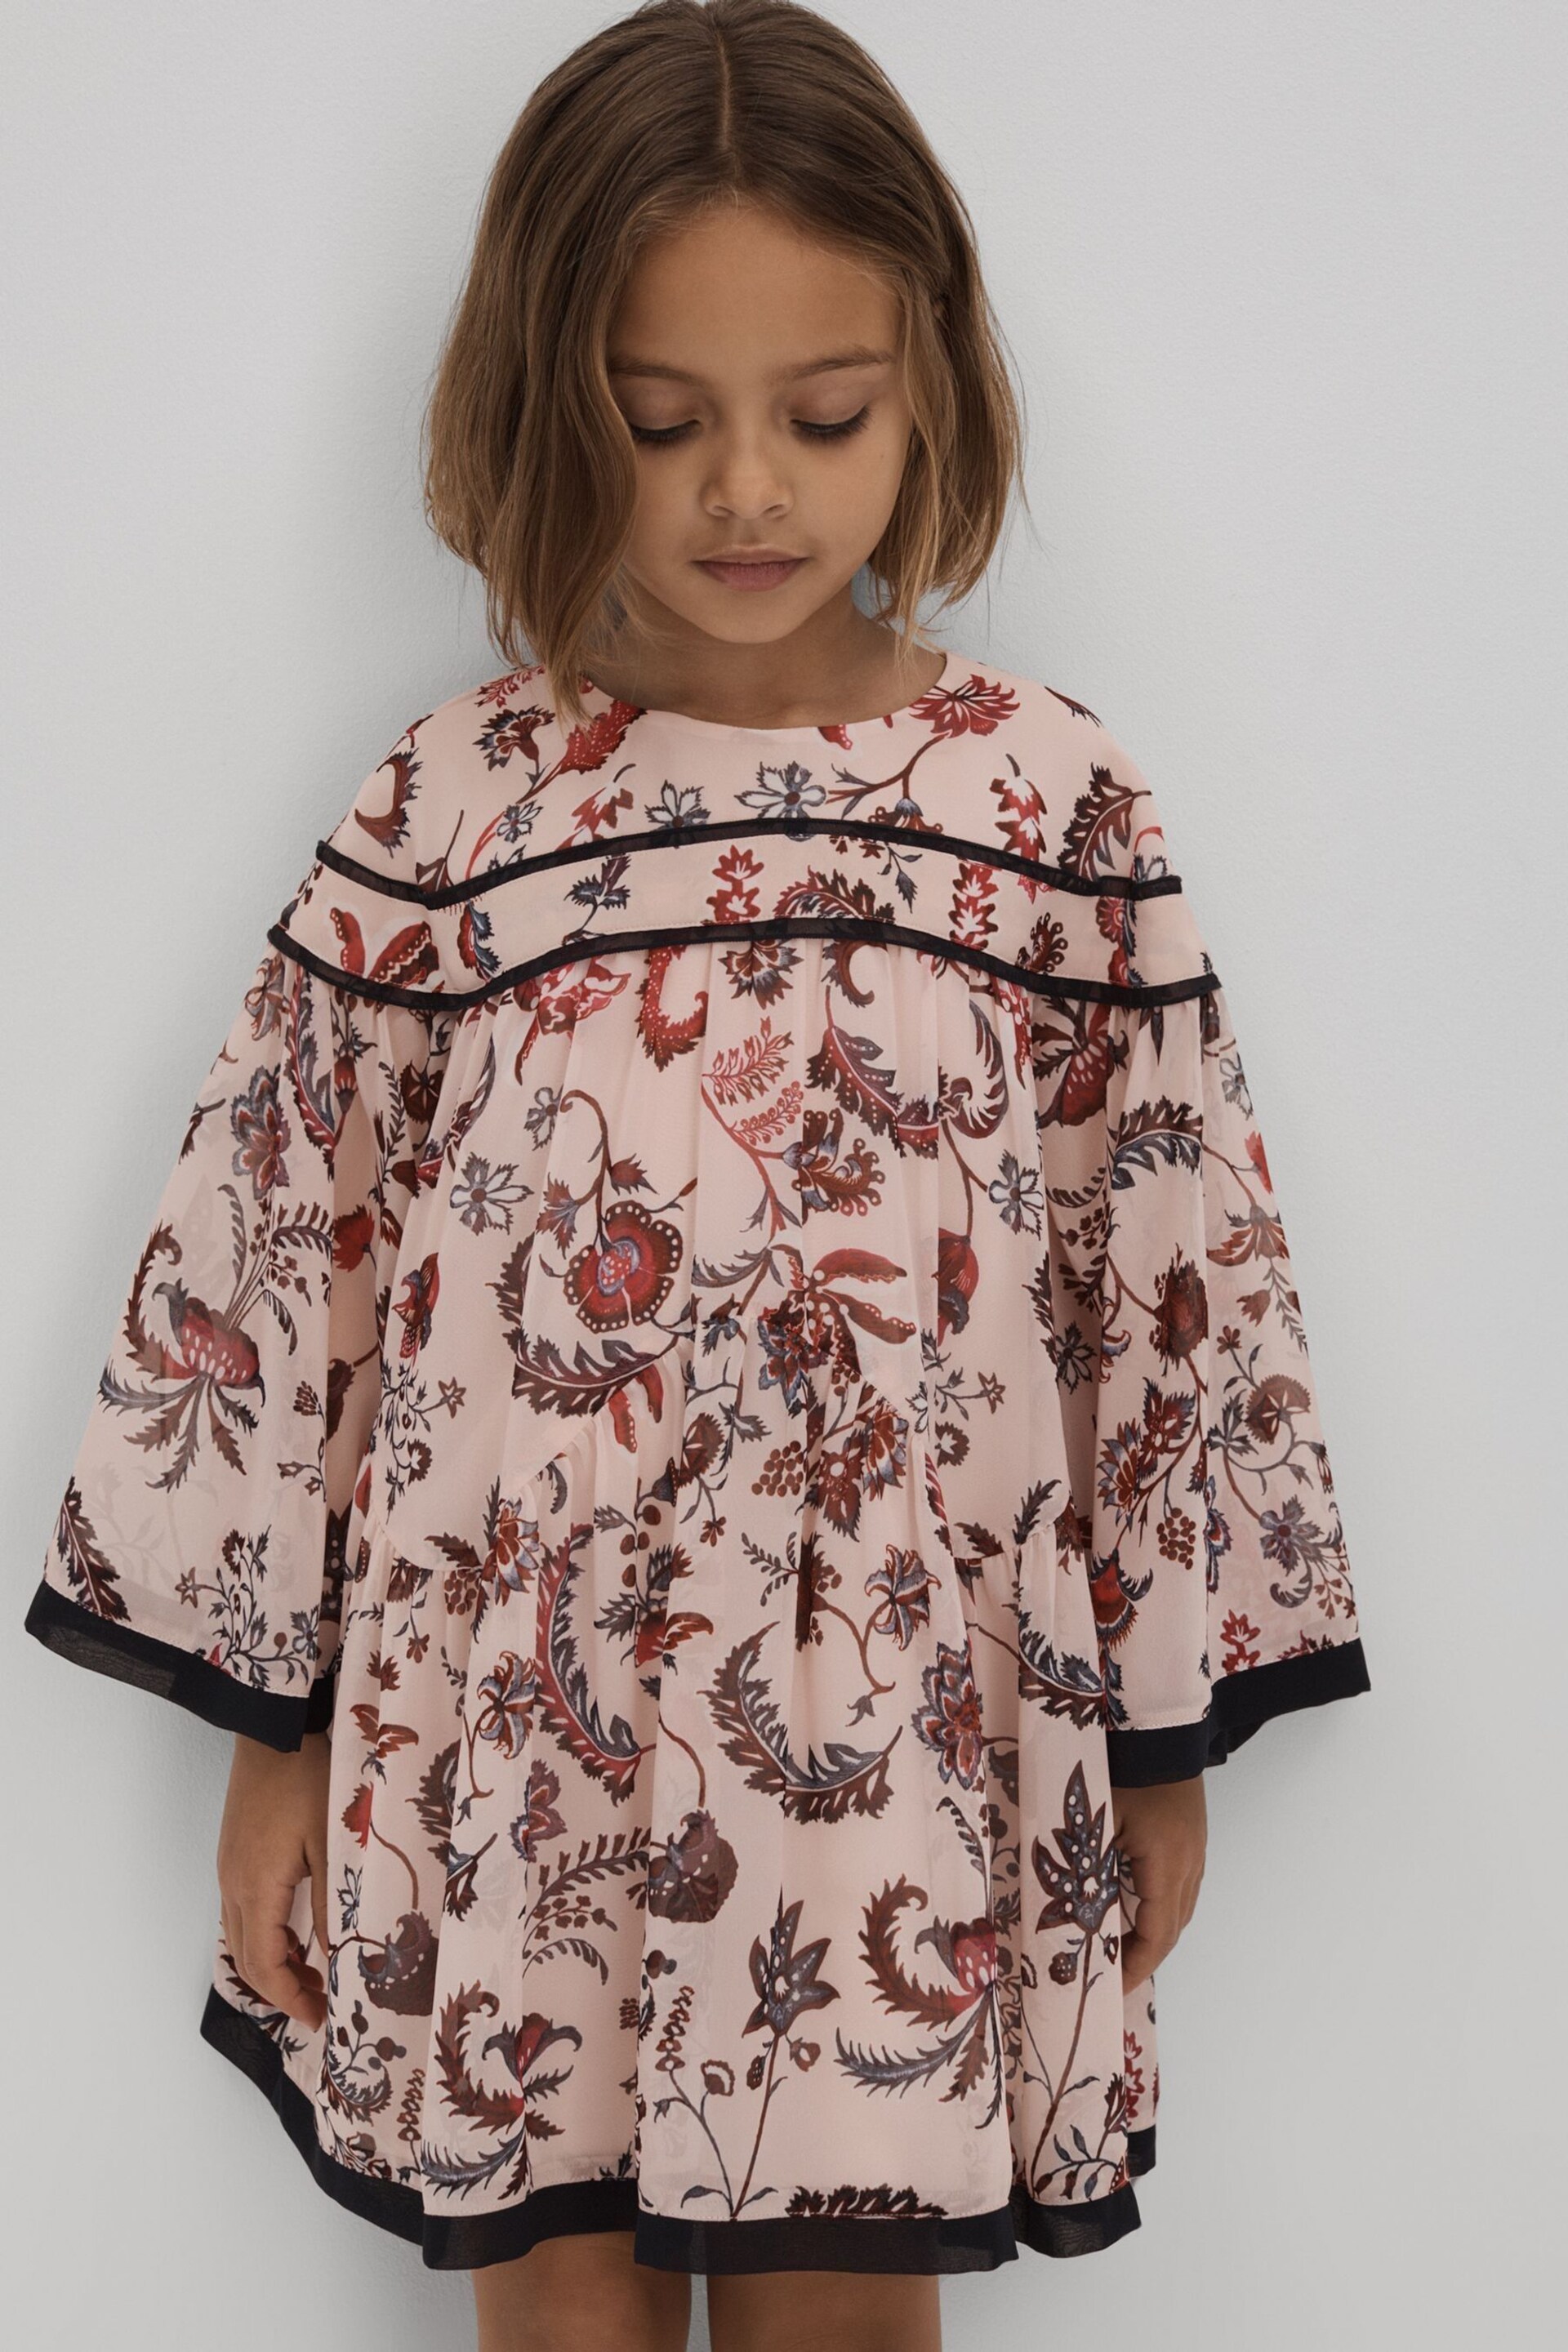 Reiss Pink Talitha Teen Printed Bell Sleeve Tiered Dress - Image 1 of 6